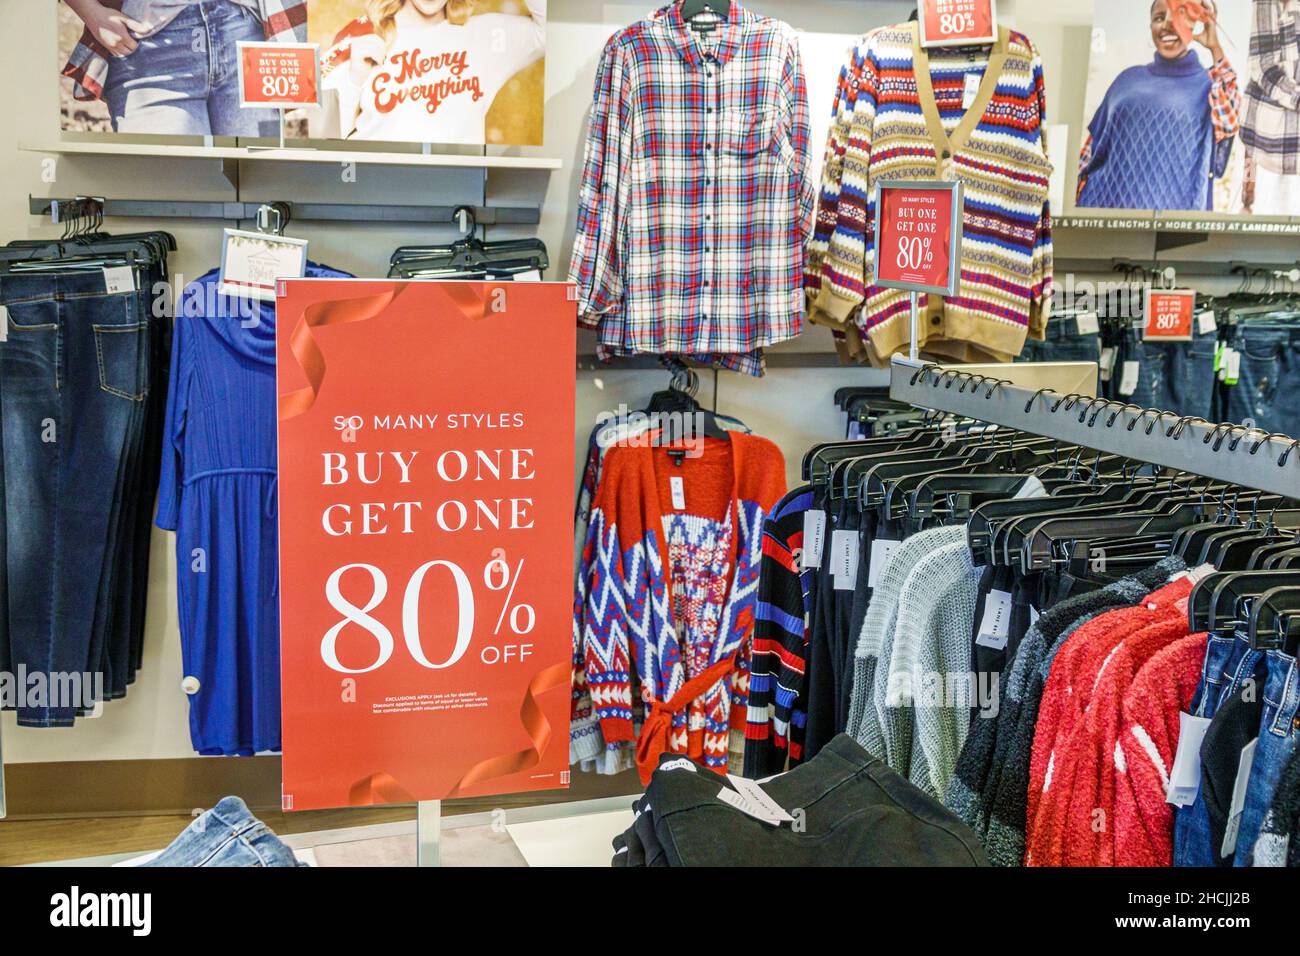 Lane bryant store hi-res stock photography and images - Alamy